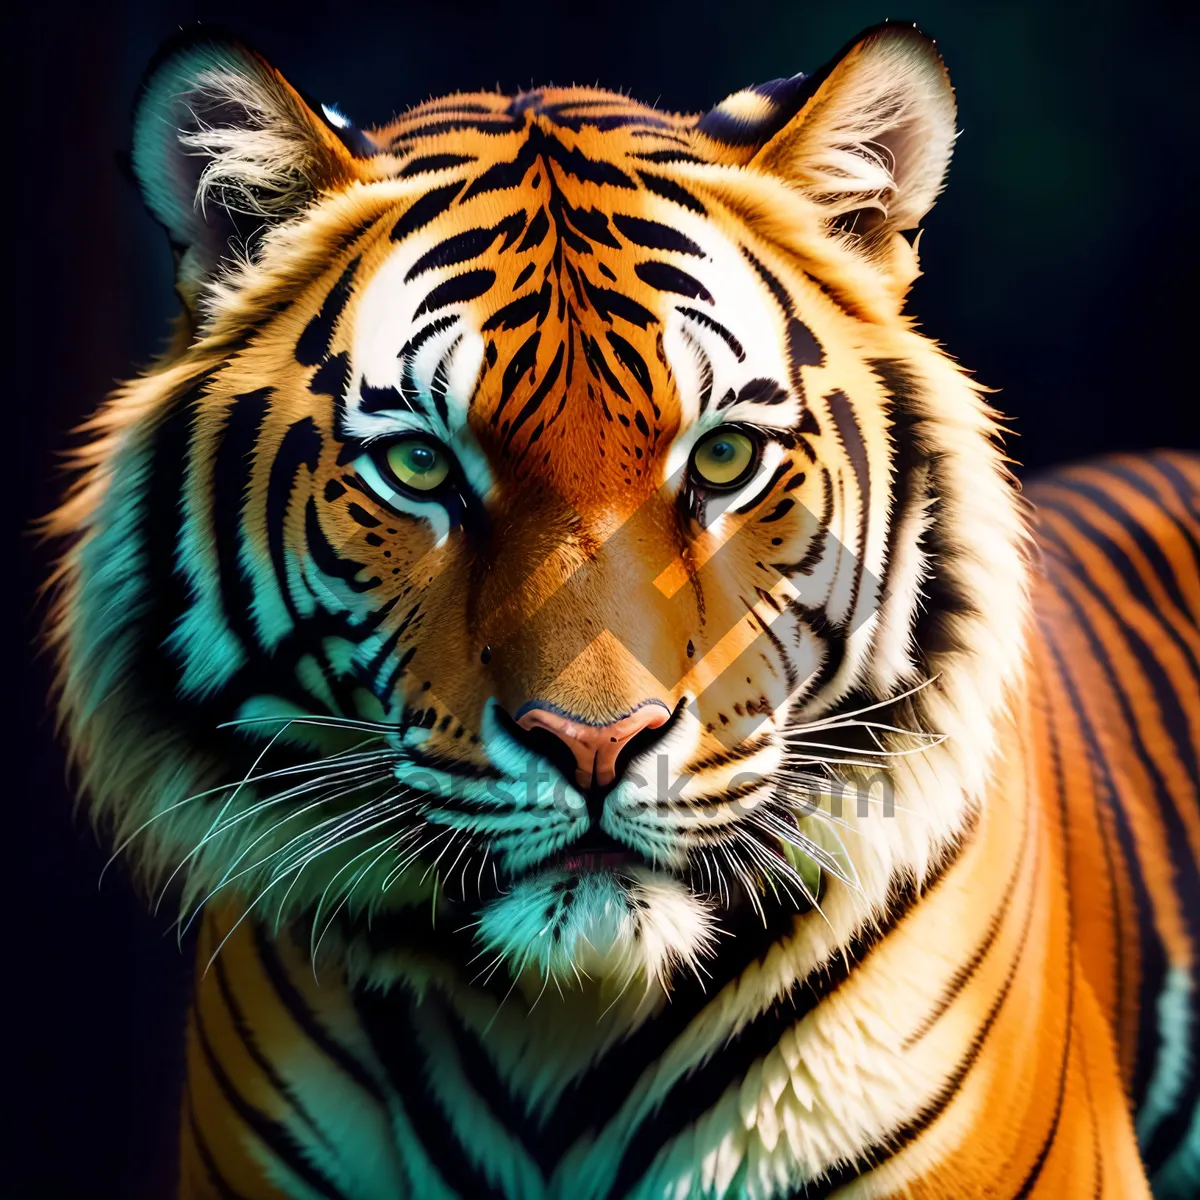 Picture of Striped Hunter: Majestic Tiger in the Wild